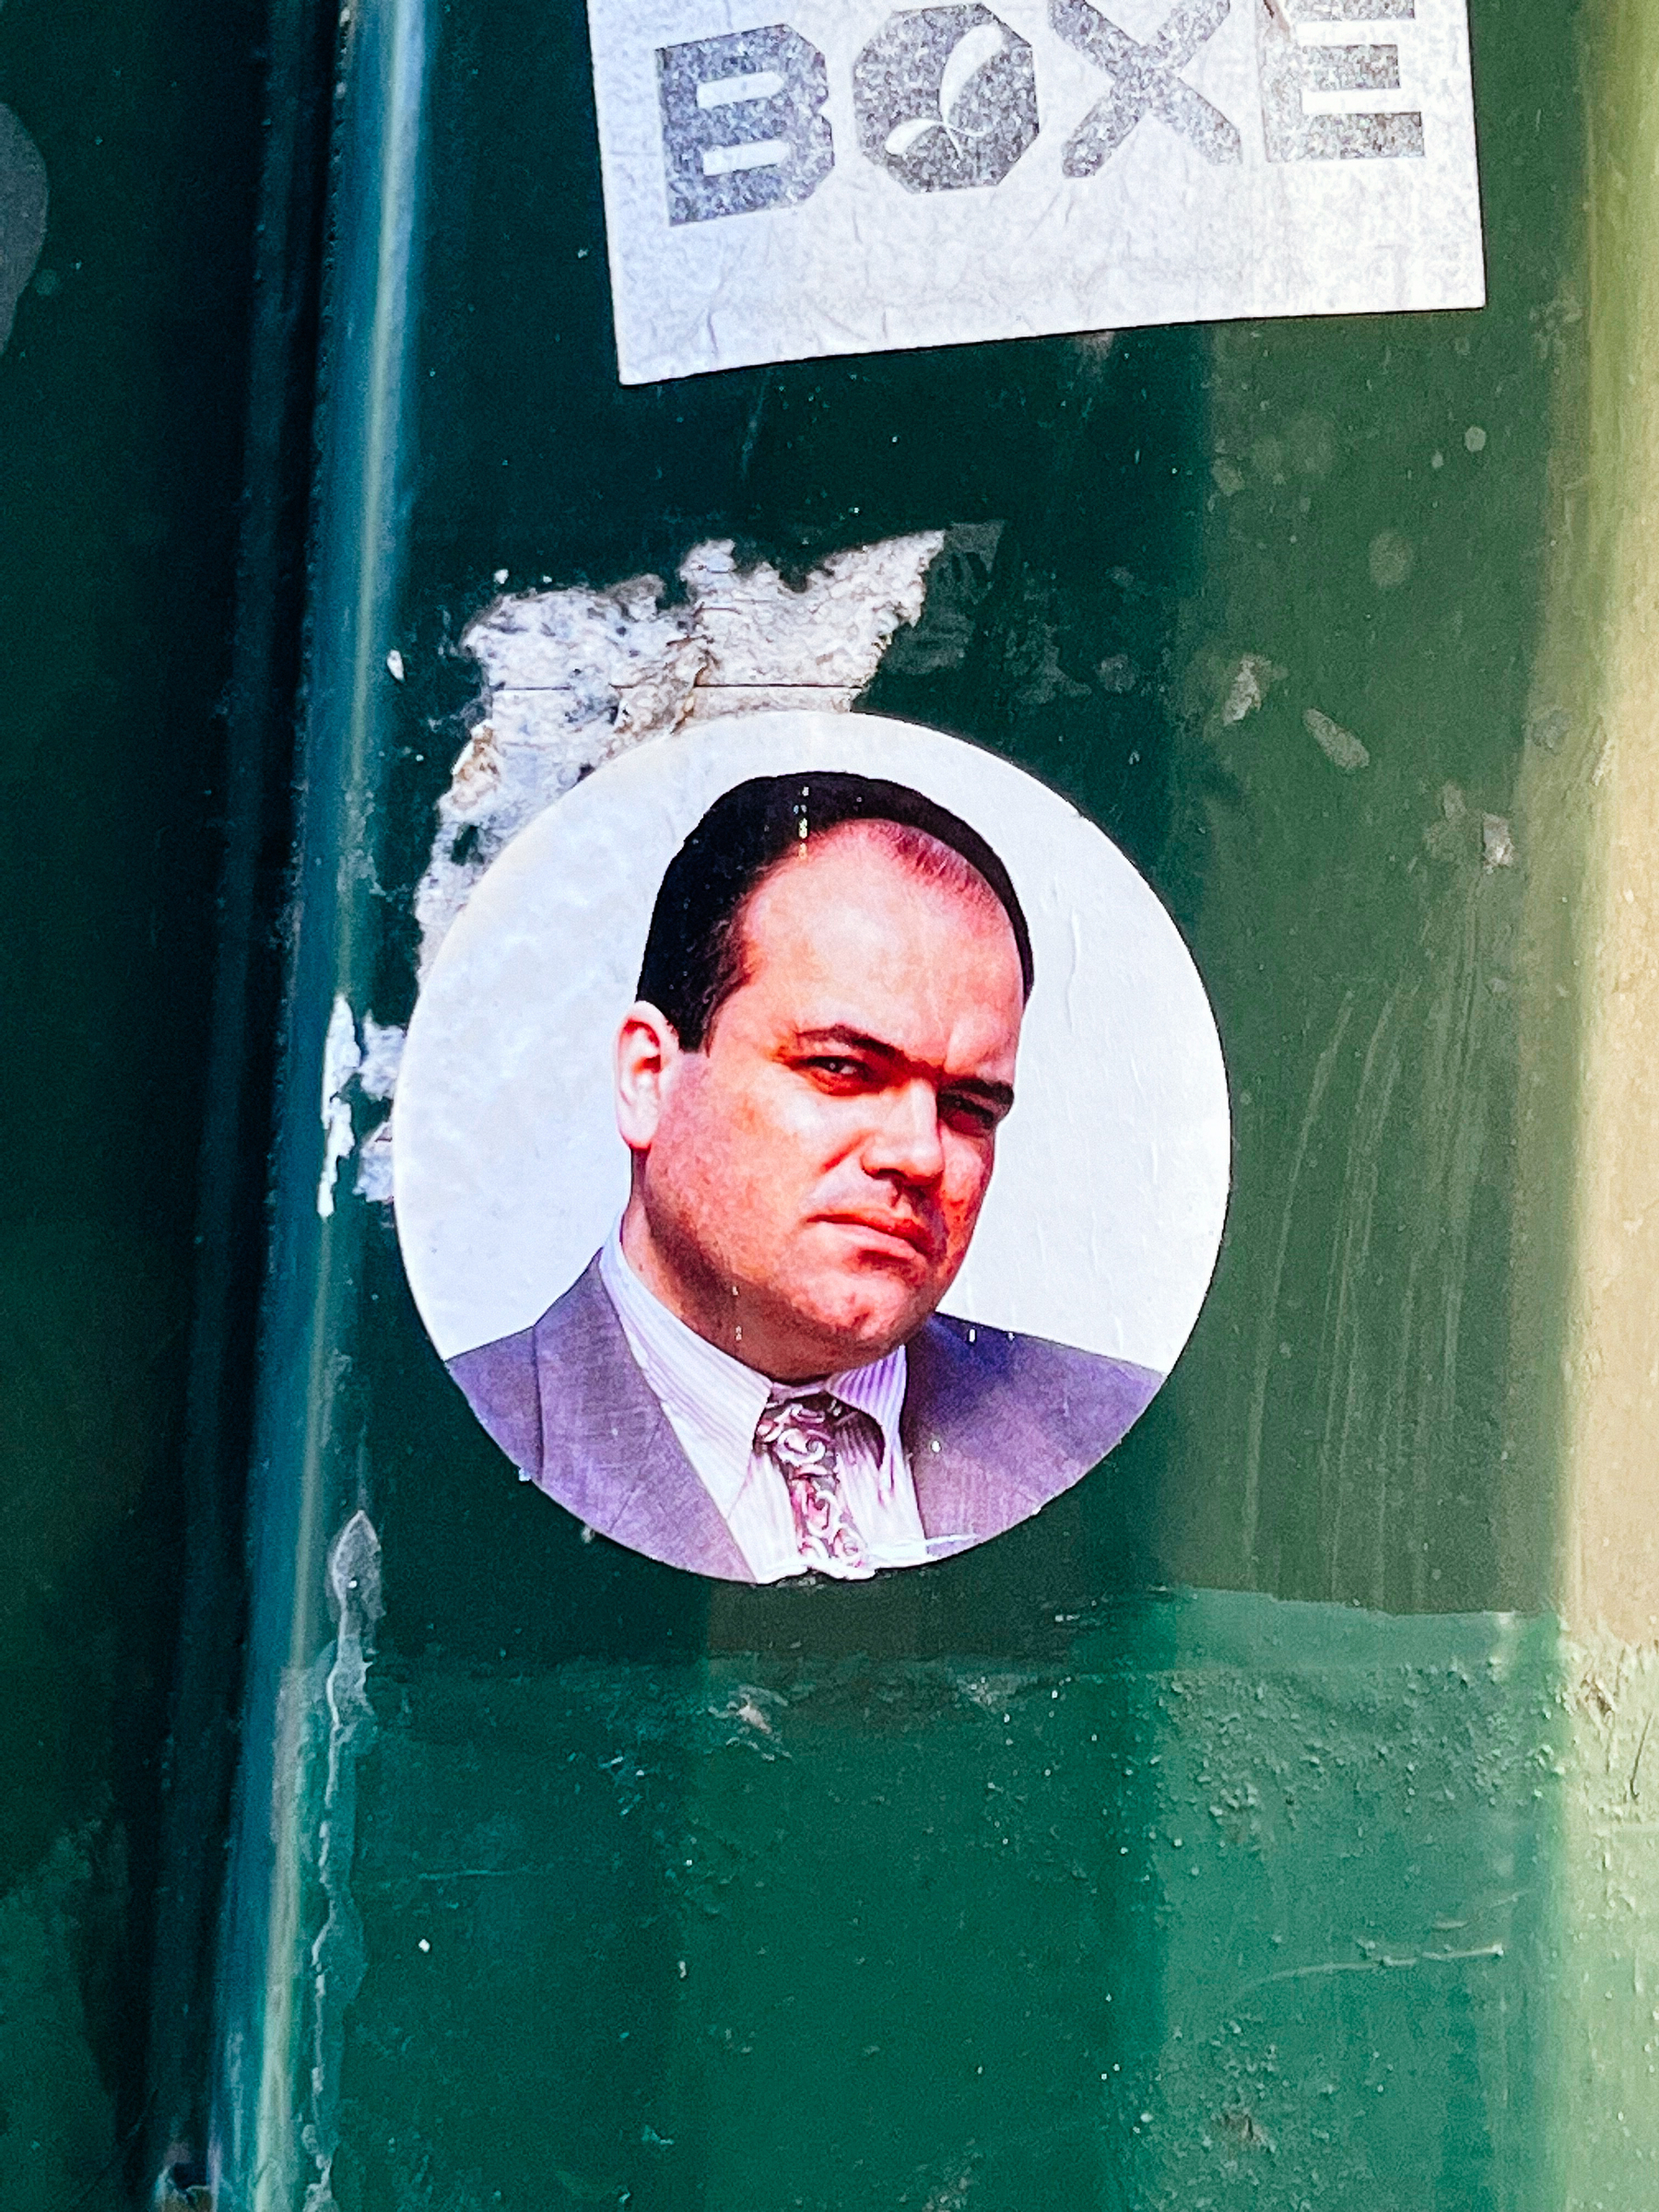 Sticker with the photo of a man looking at us. Not much more I can add, the man looks really unremarkable. 